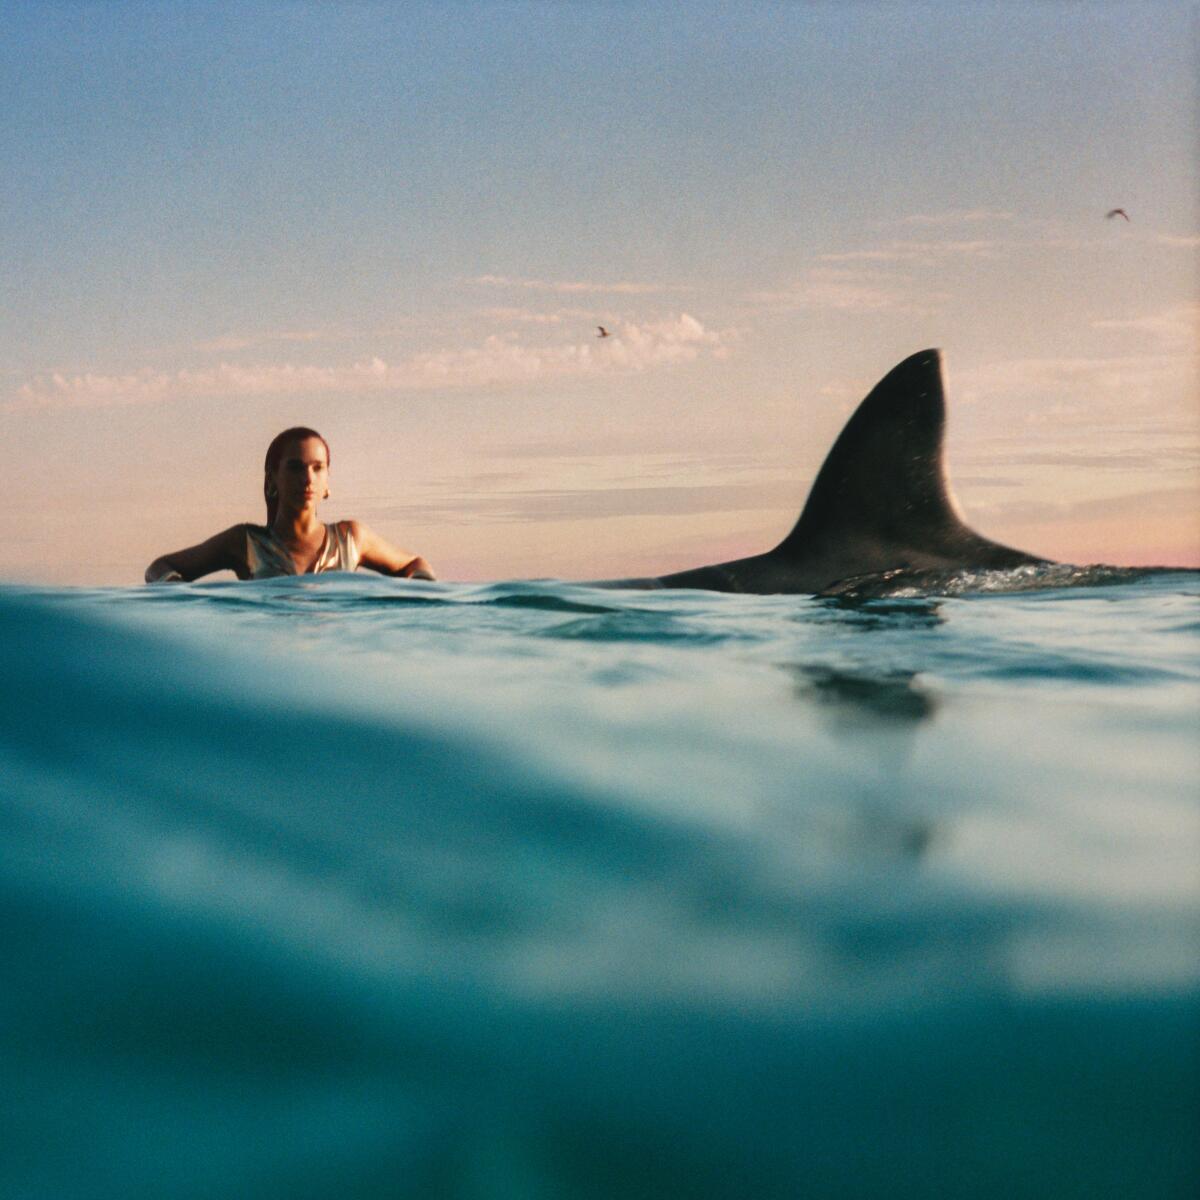 A woman in the distance in the ocean, next to a large shark fin.